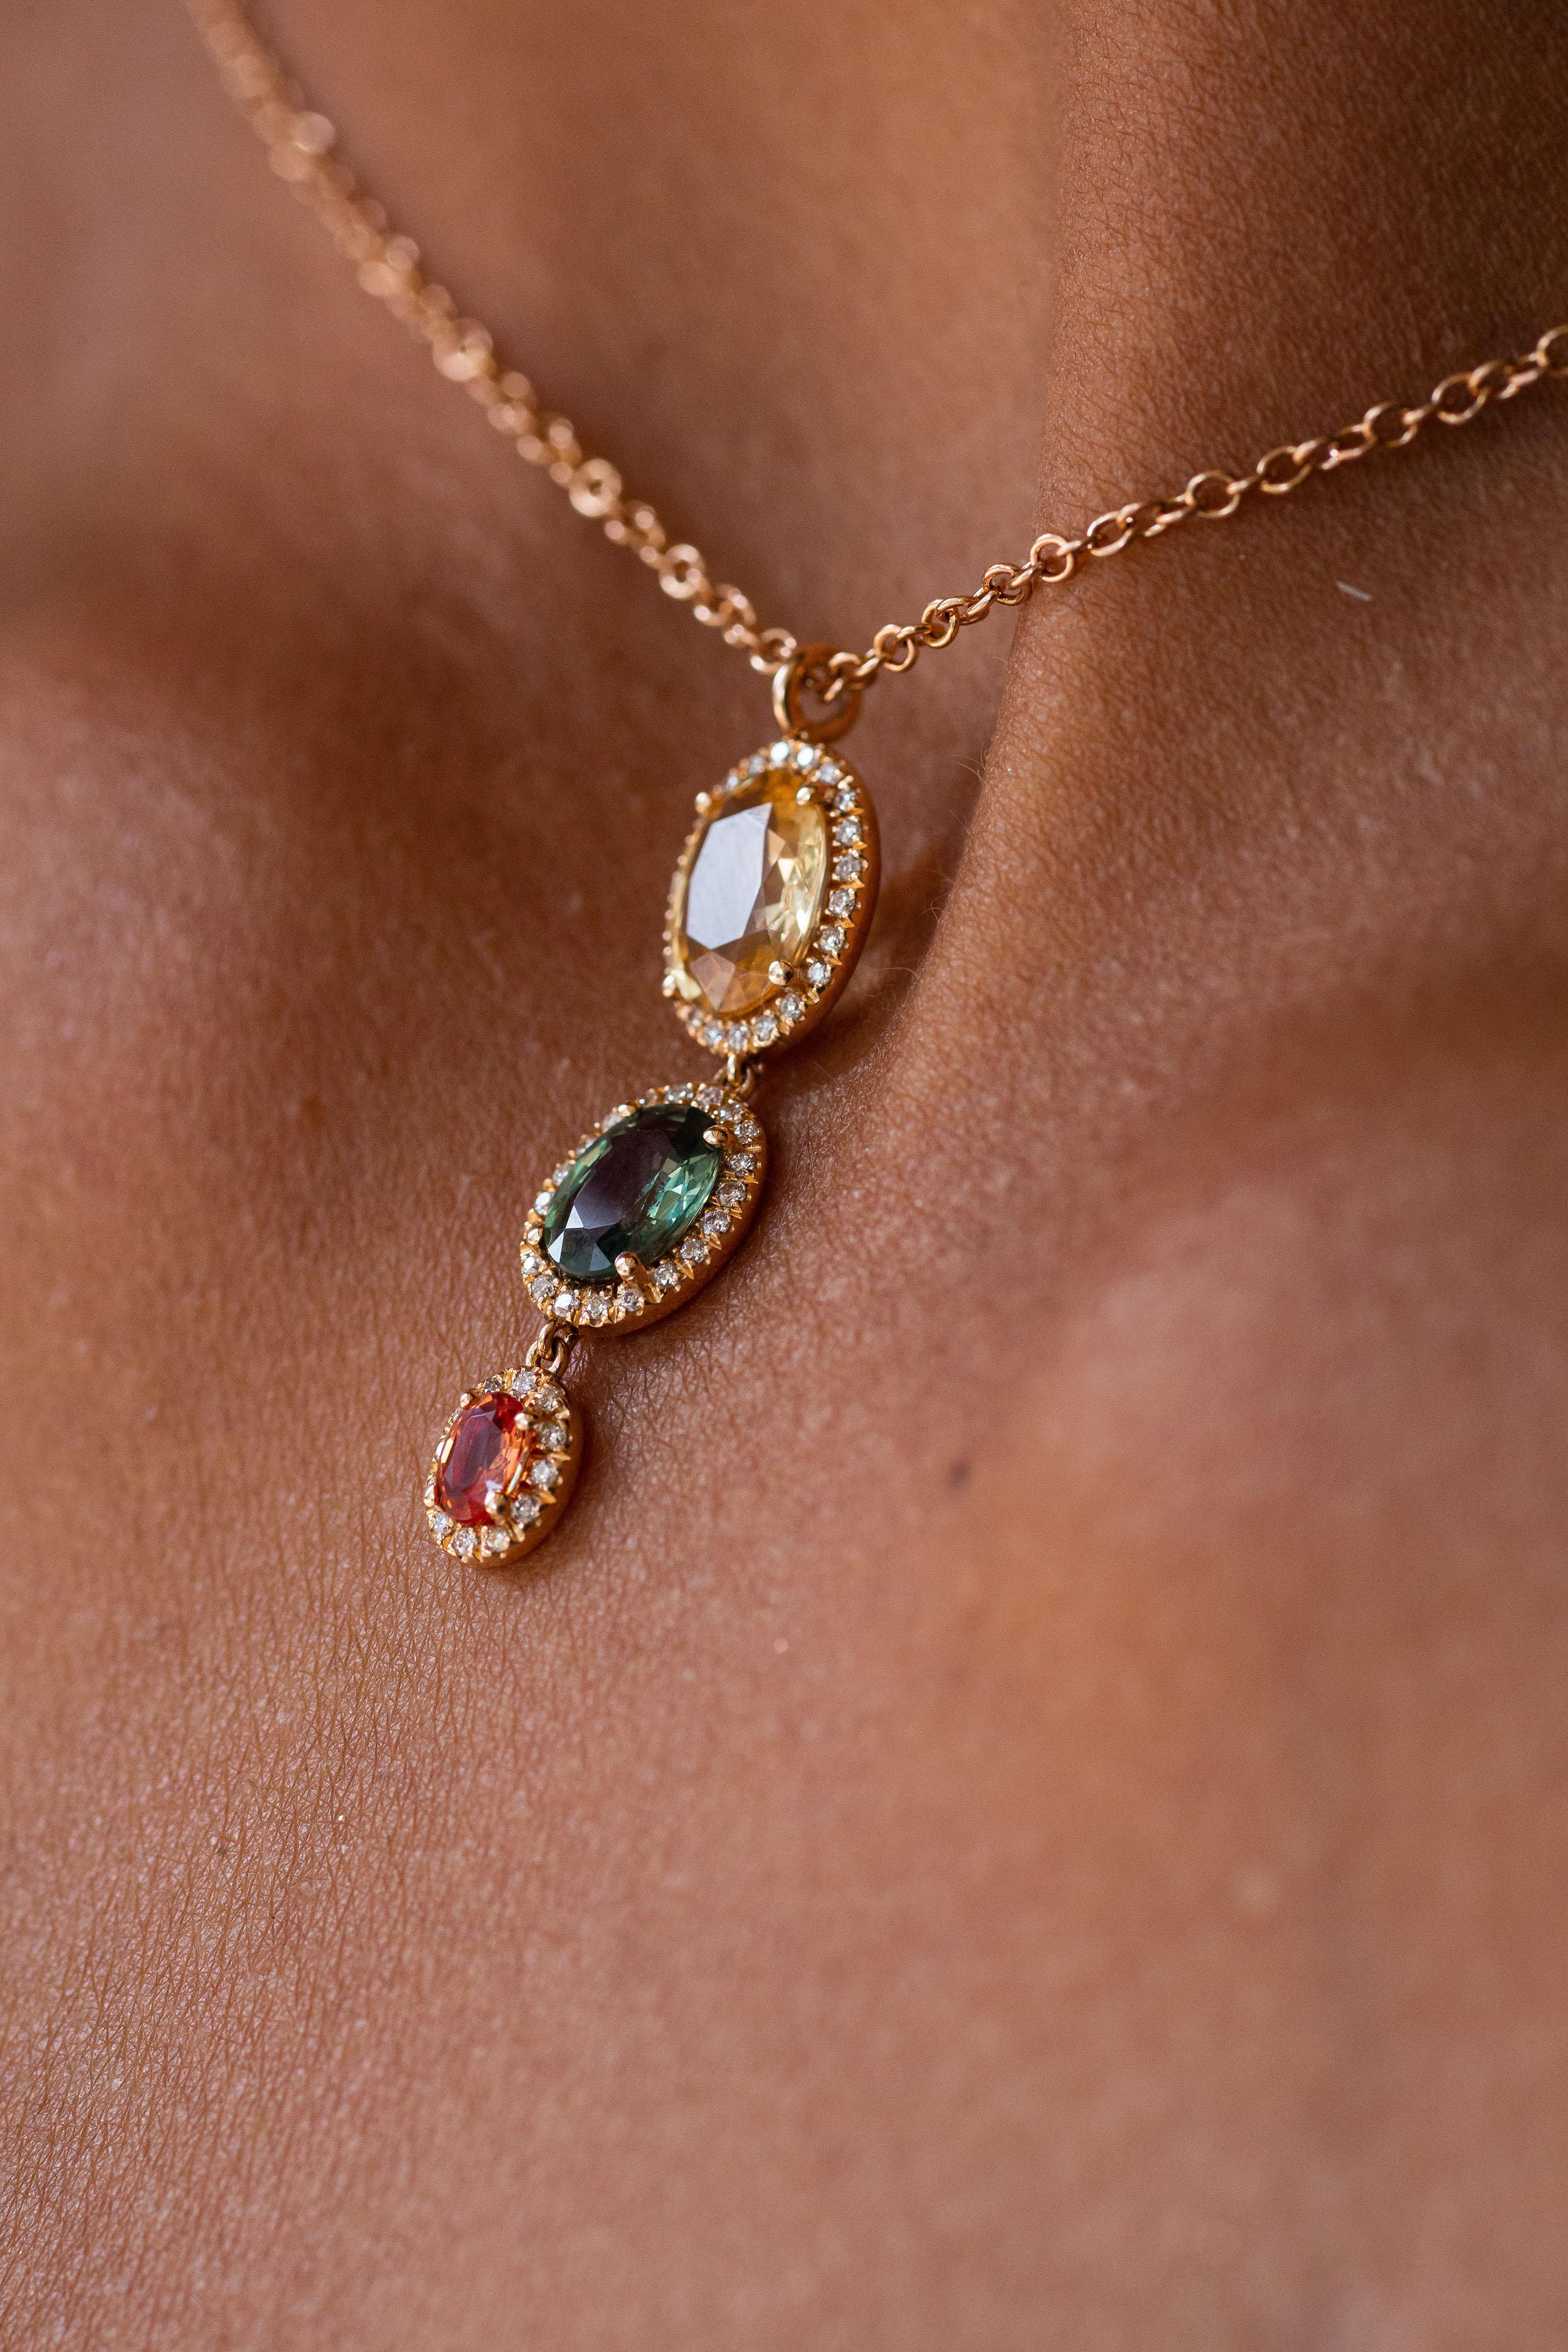 18K rose gold pendant is from Riad Collection. This beautiful necklace is made from 3 oval shape multi-coloured sapphires in total of 2.33 Carat and white diamonds in total of 0.16 Carat. Total metal weight is 4.40 gr. The pendant is 3 cm long. 